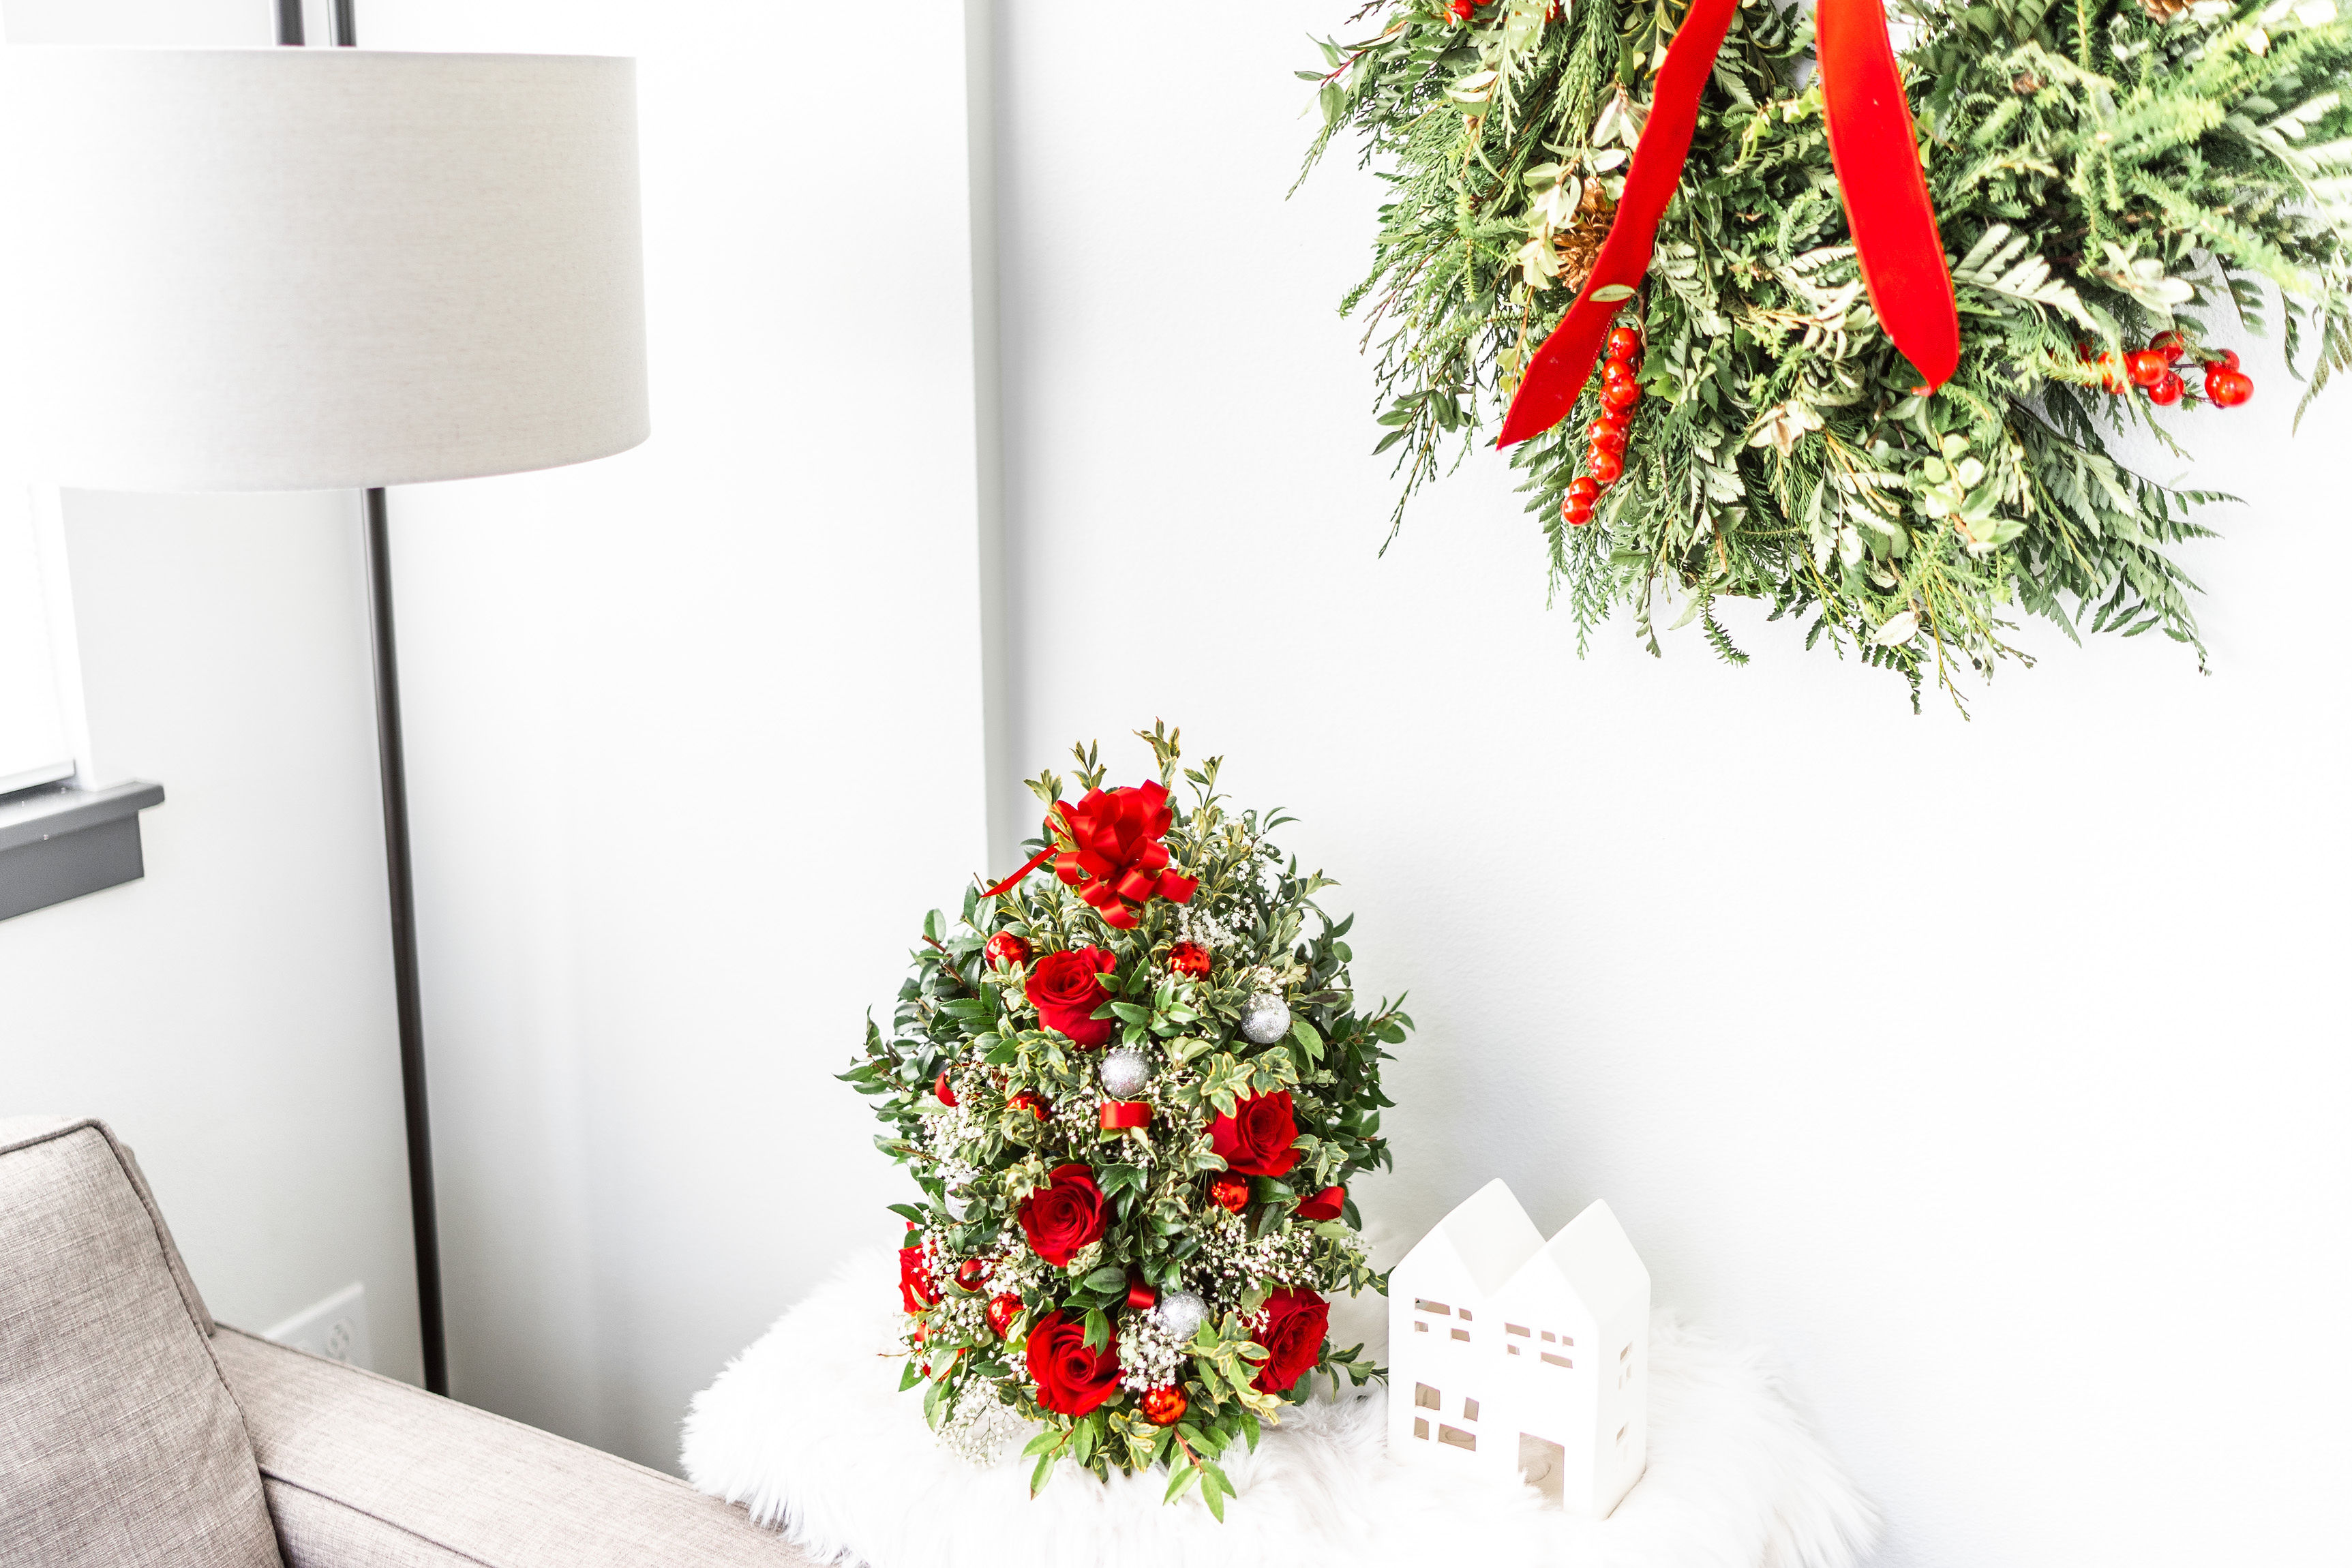 Mini-Christmas Tree and Wreath in A Living Room